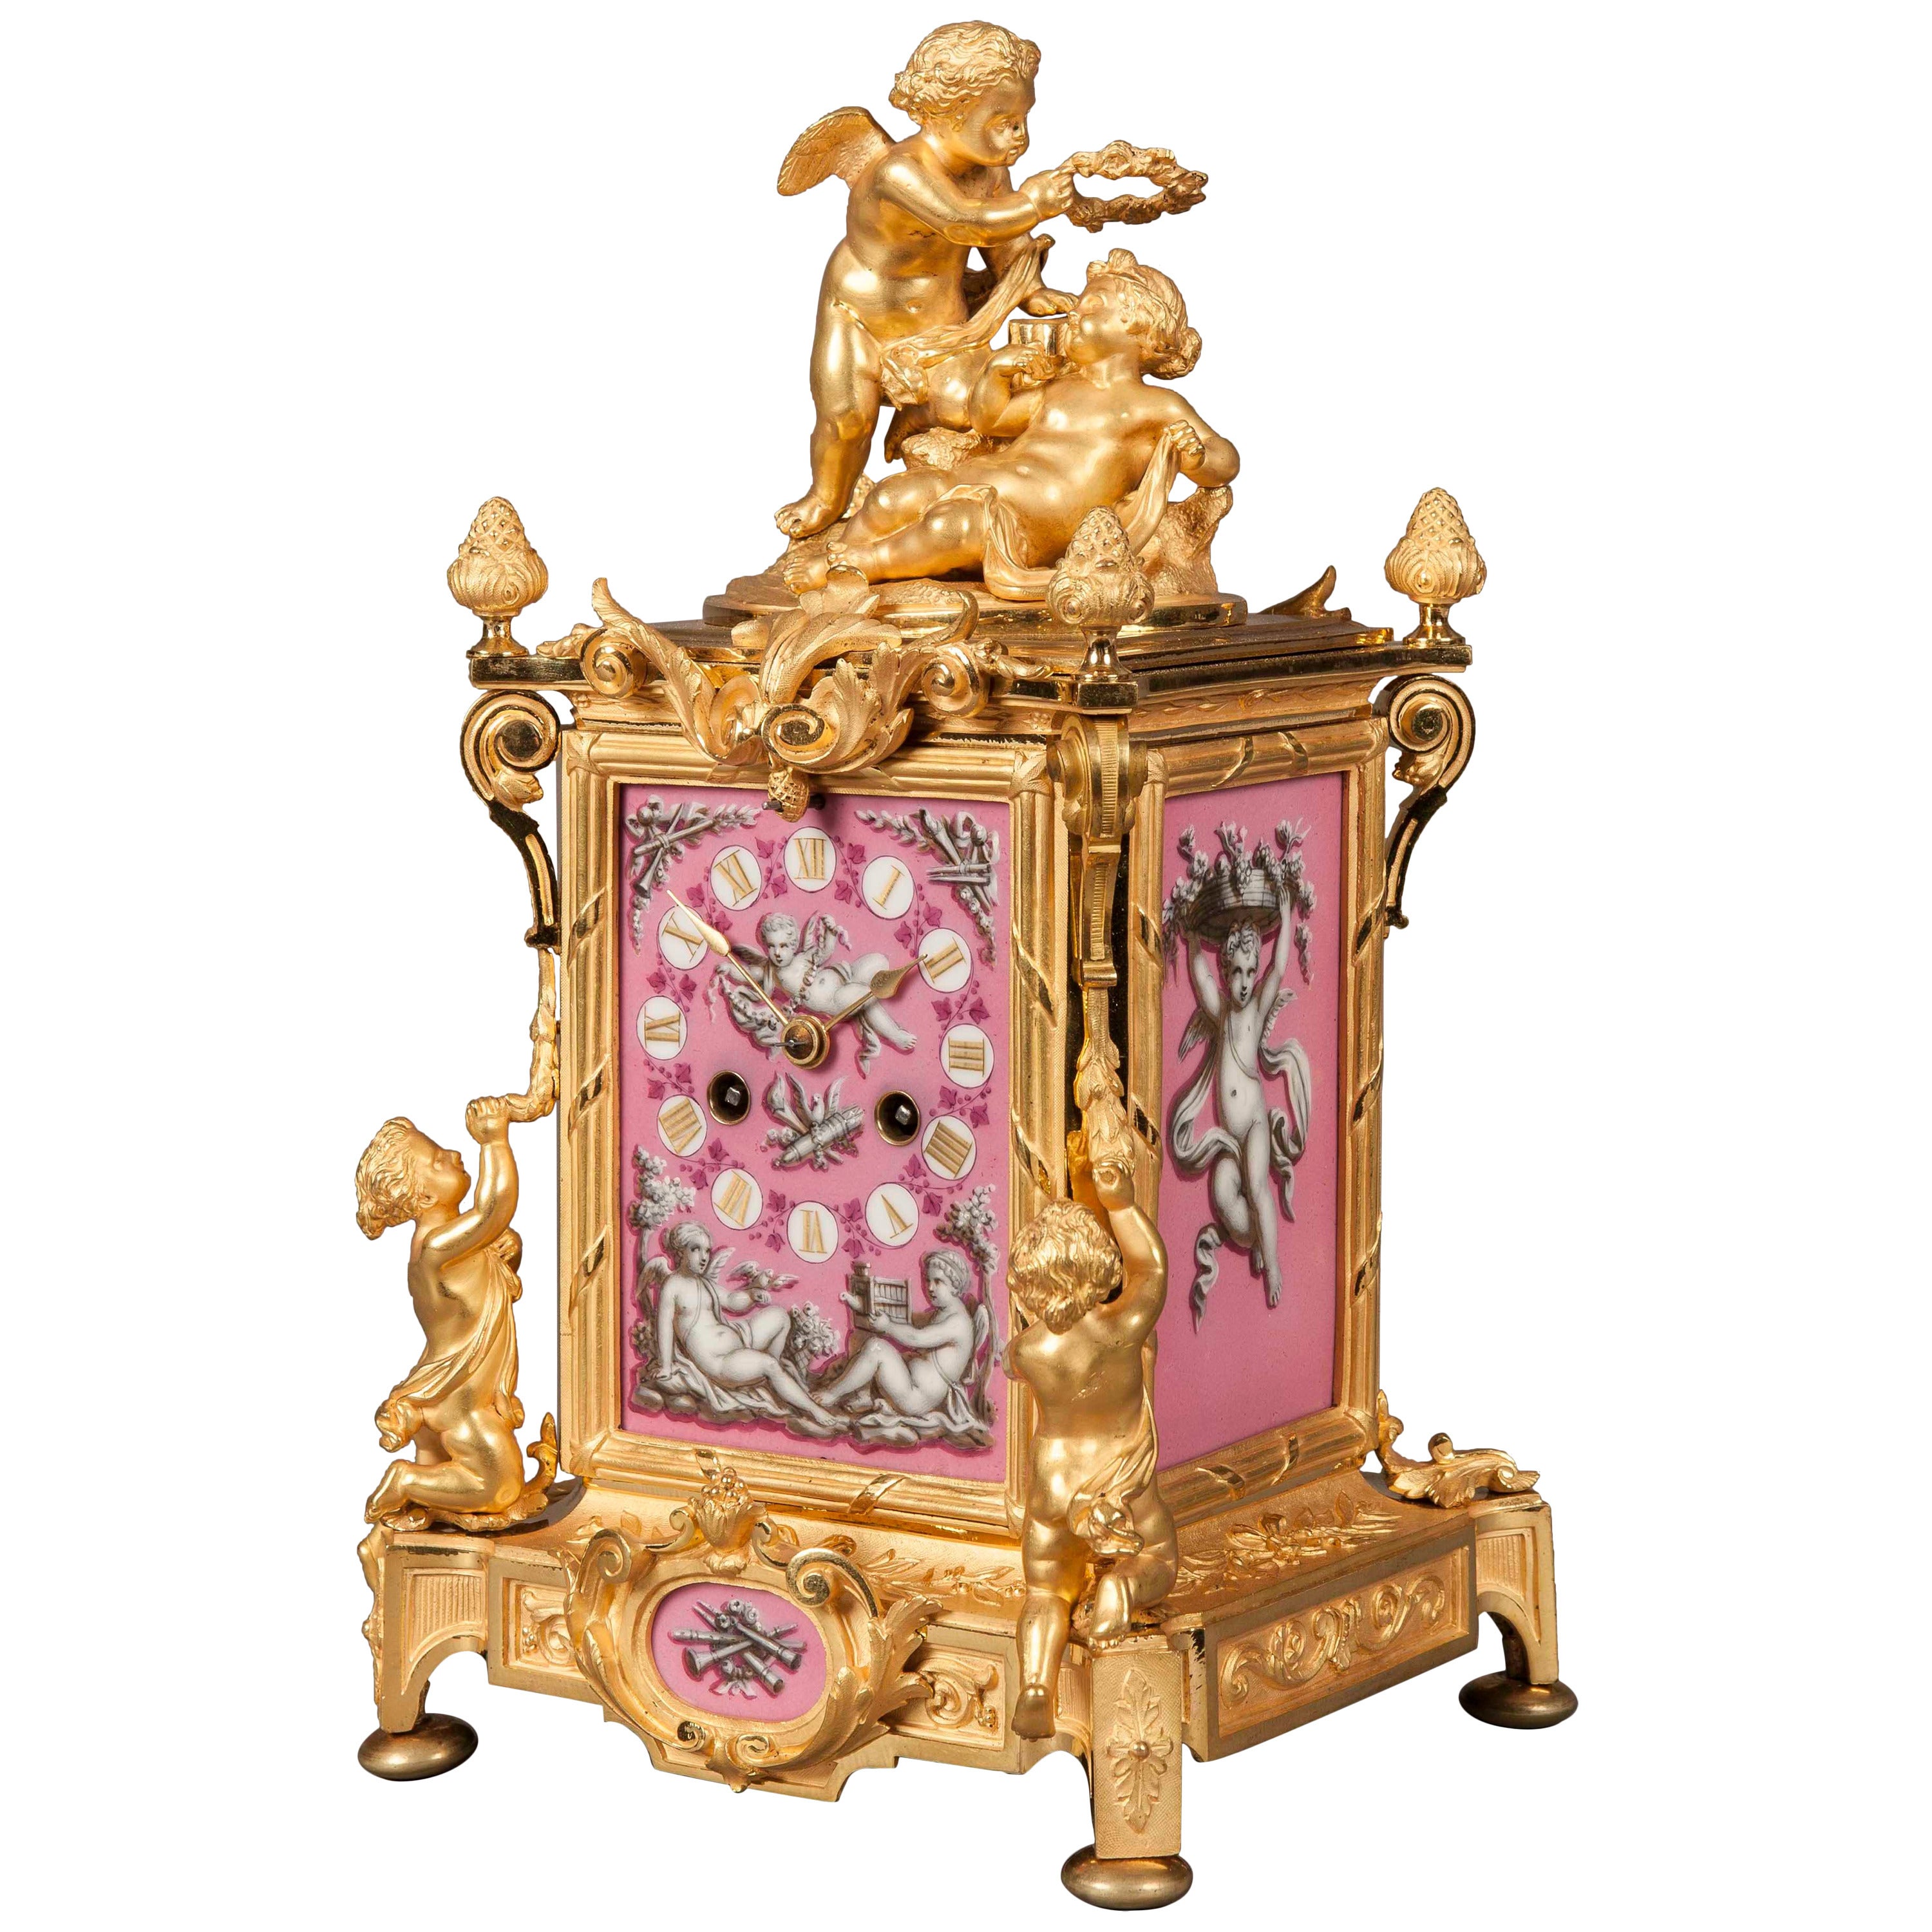 French 19th Century Gilt Bronze and Pink Porcelain Carriage Clock